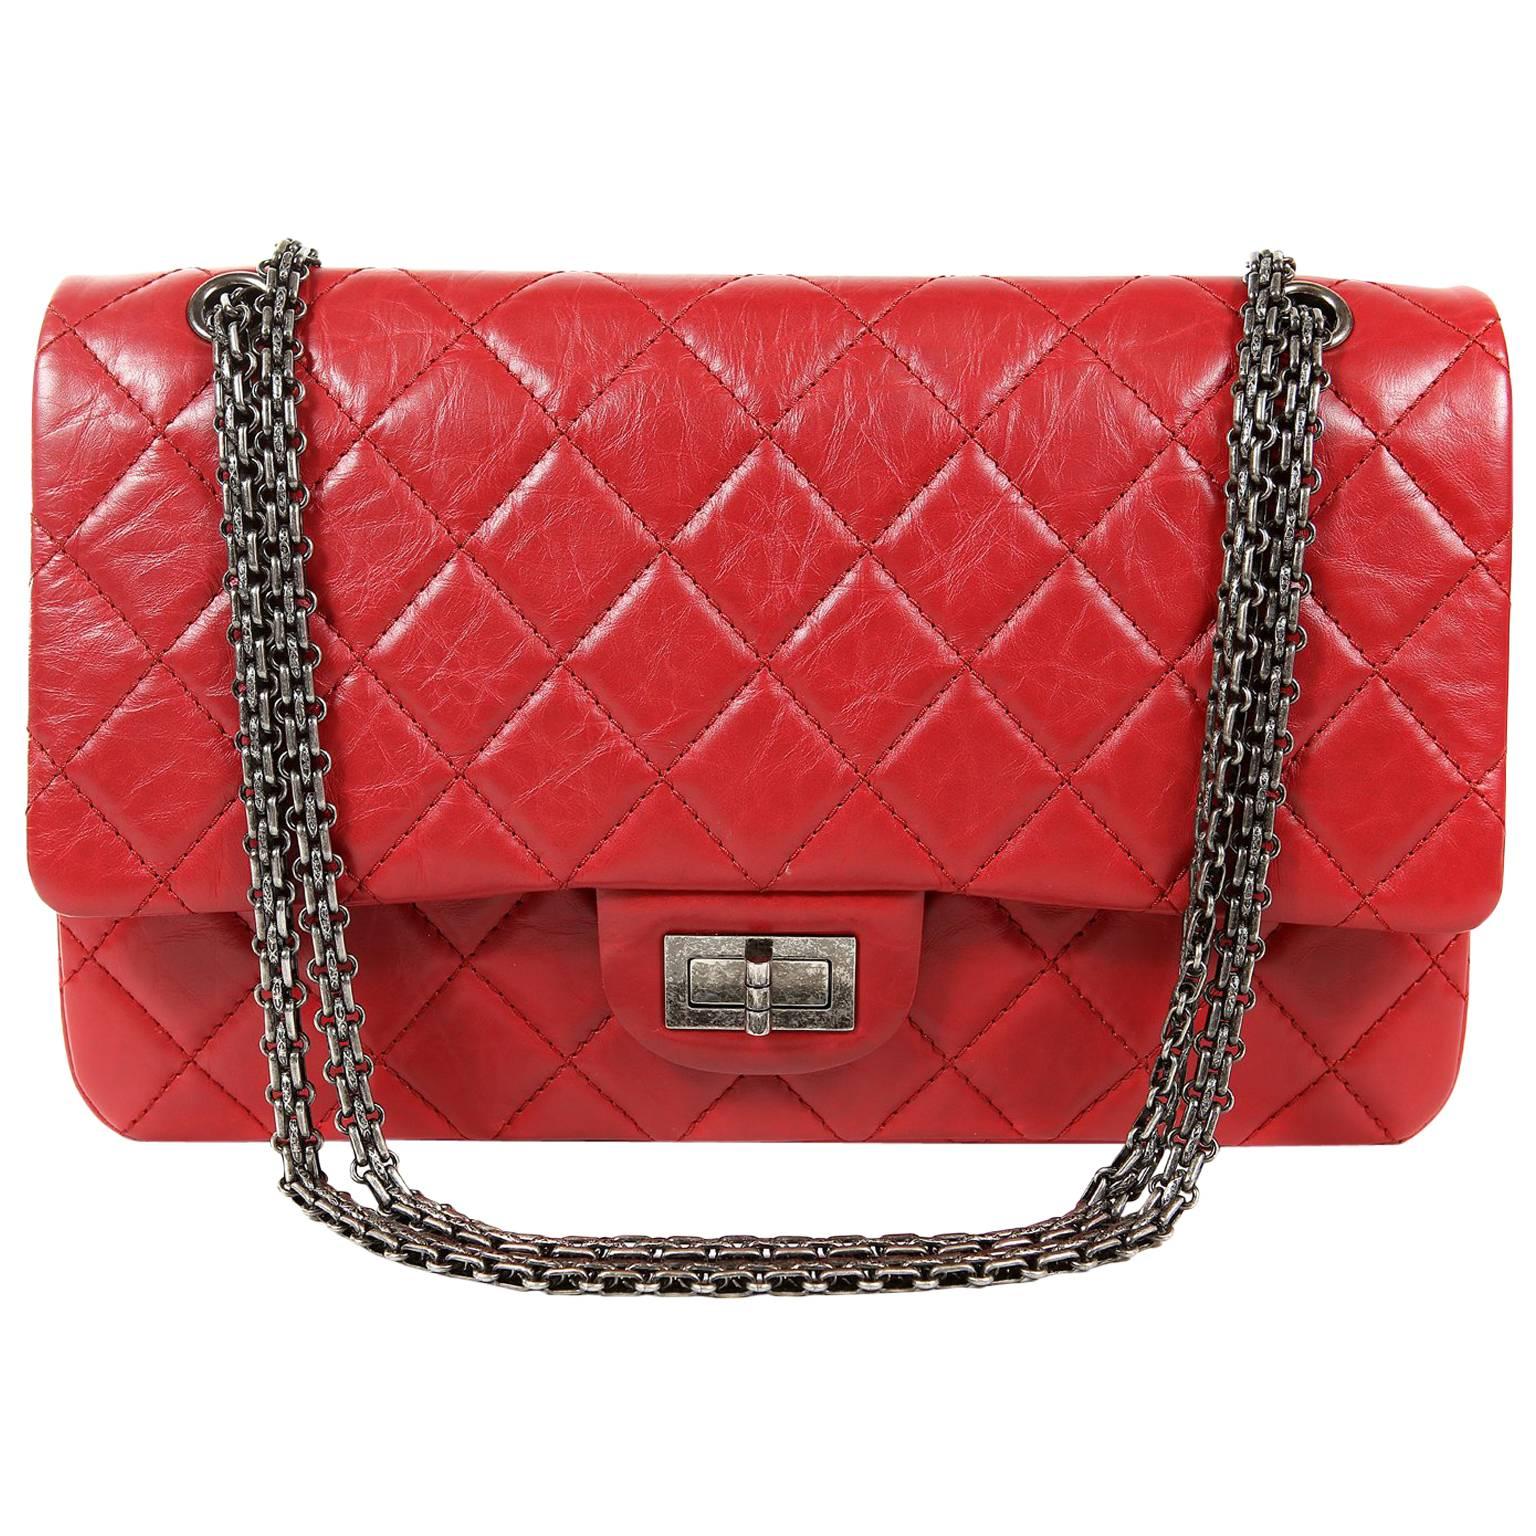 Chanel Red Calfskin 2.55 Reissue Flap Bag- 227 size